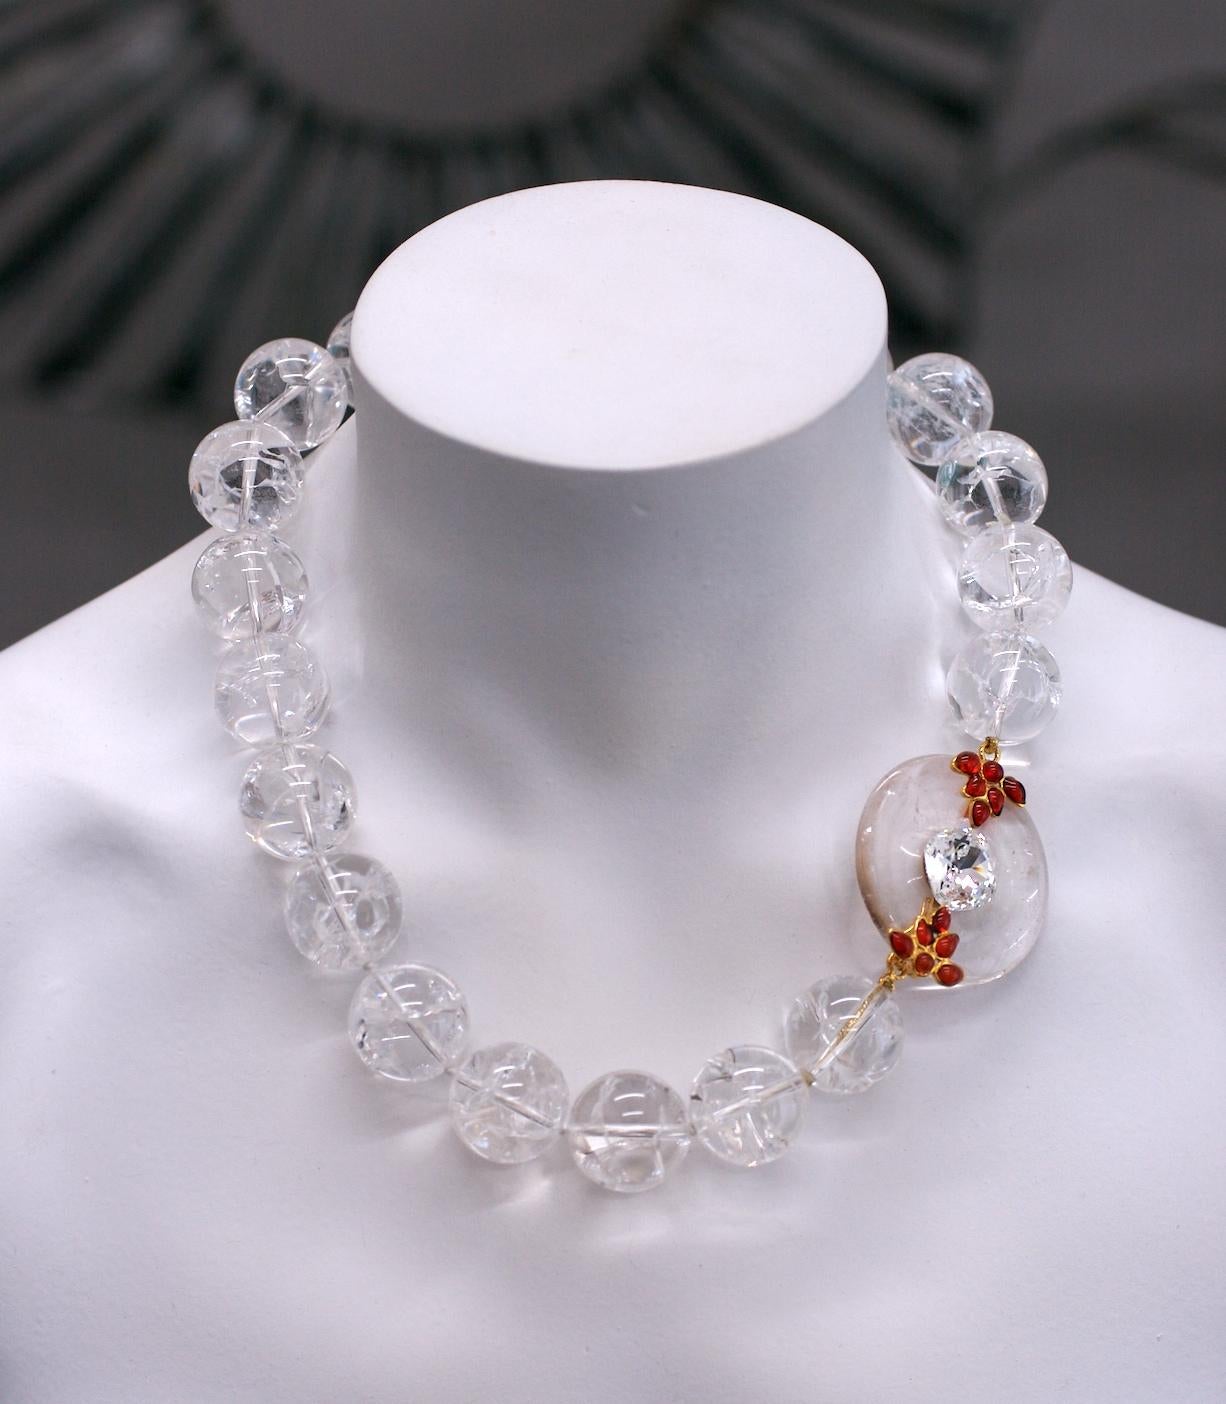 Rock Crystal and Poured Glass Bead Necklace, MWLC In New Condition For Sale In New York, NY